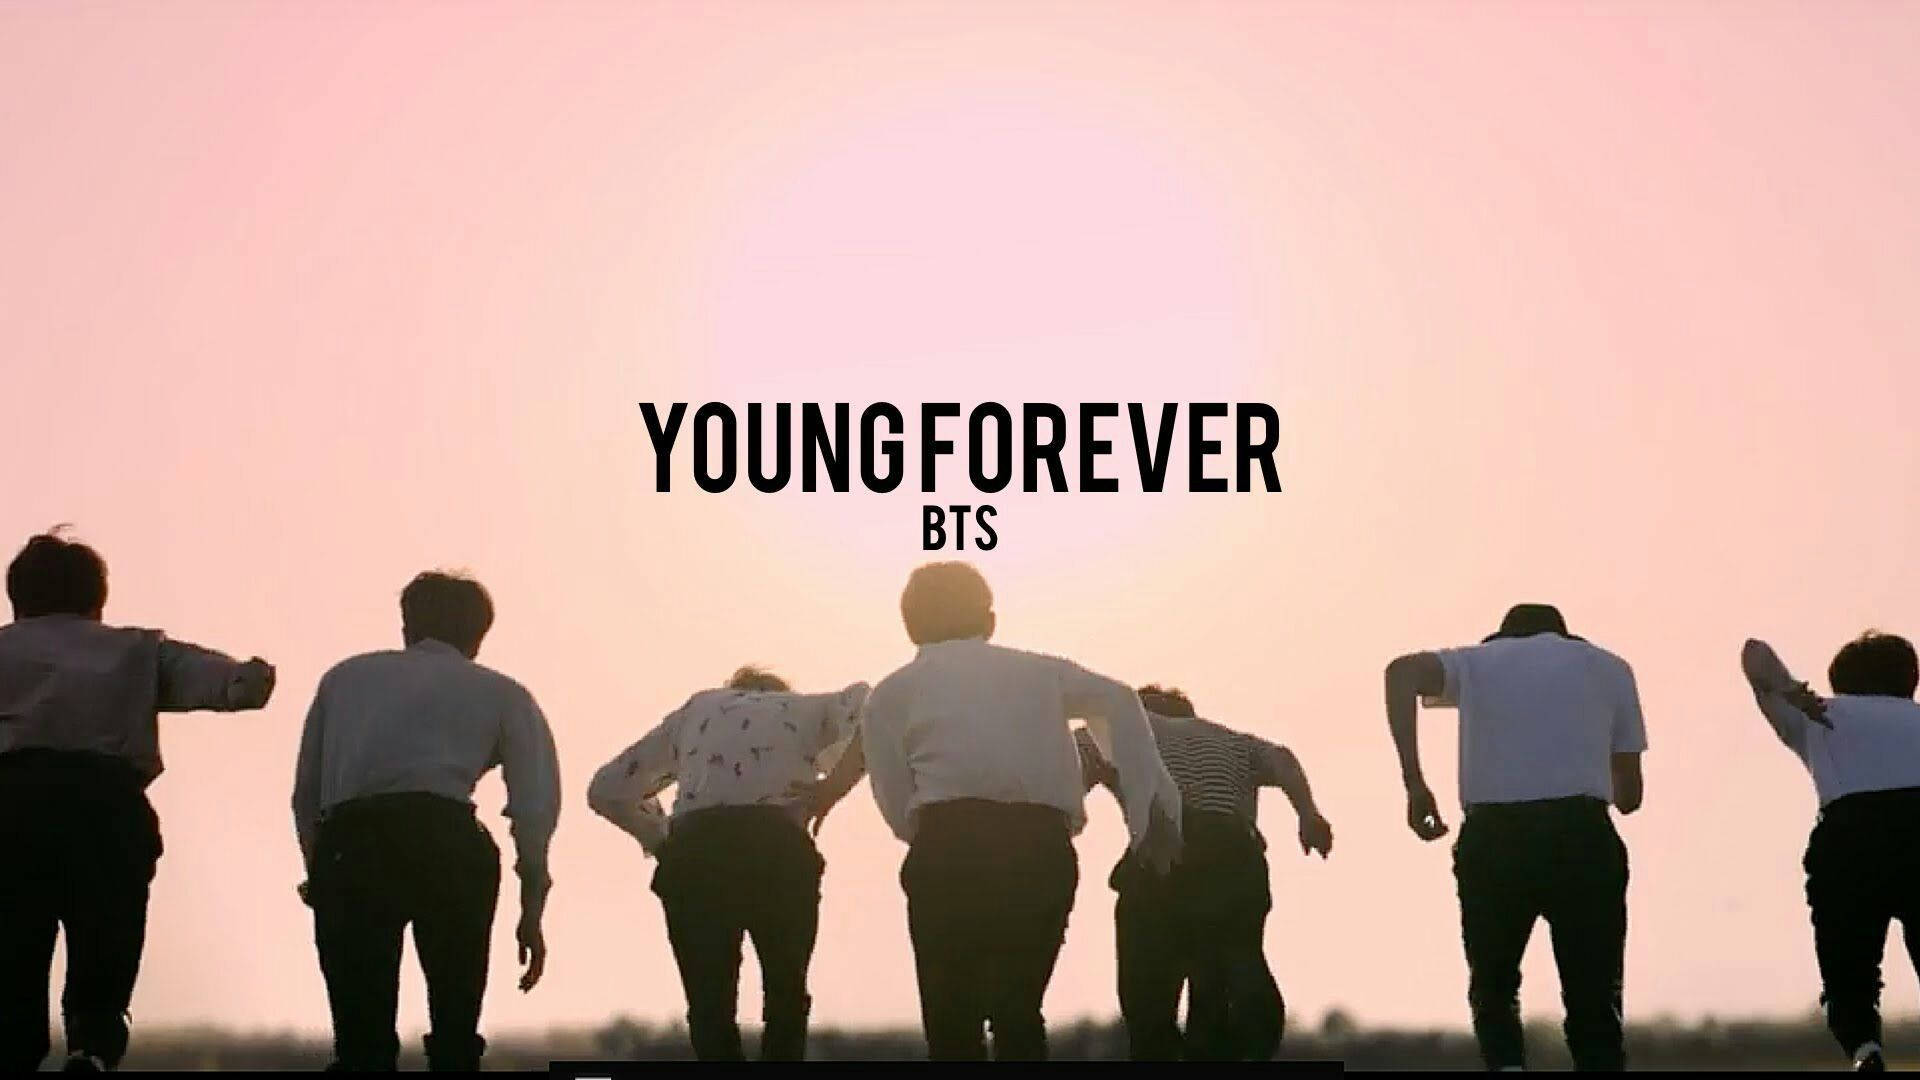 Btsyoung Forever 2020: Bts Young Forever 2020. Wallpaper